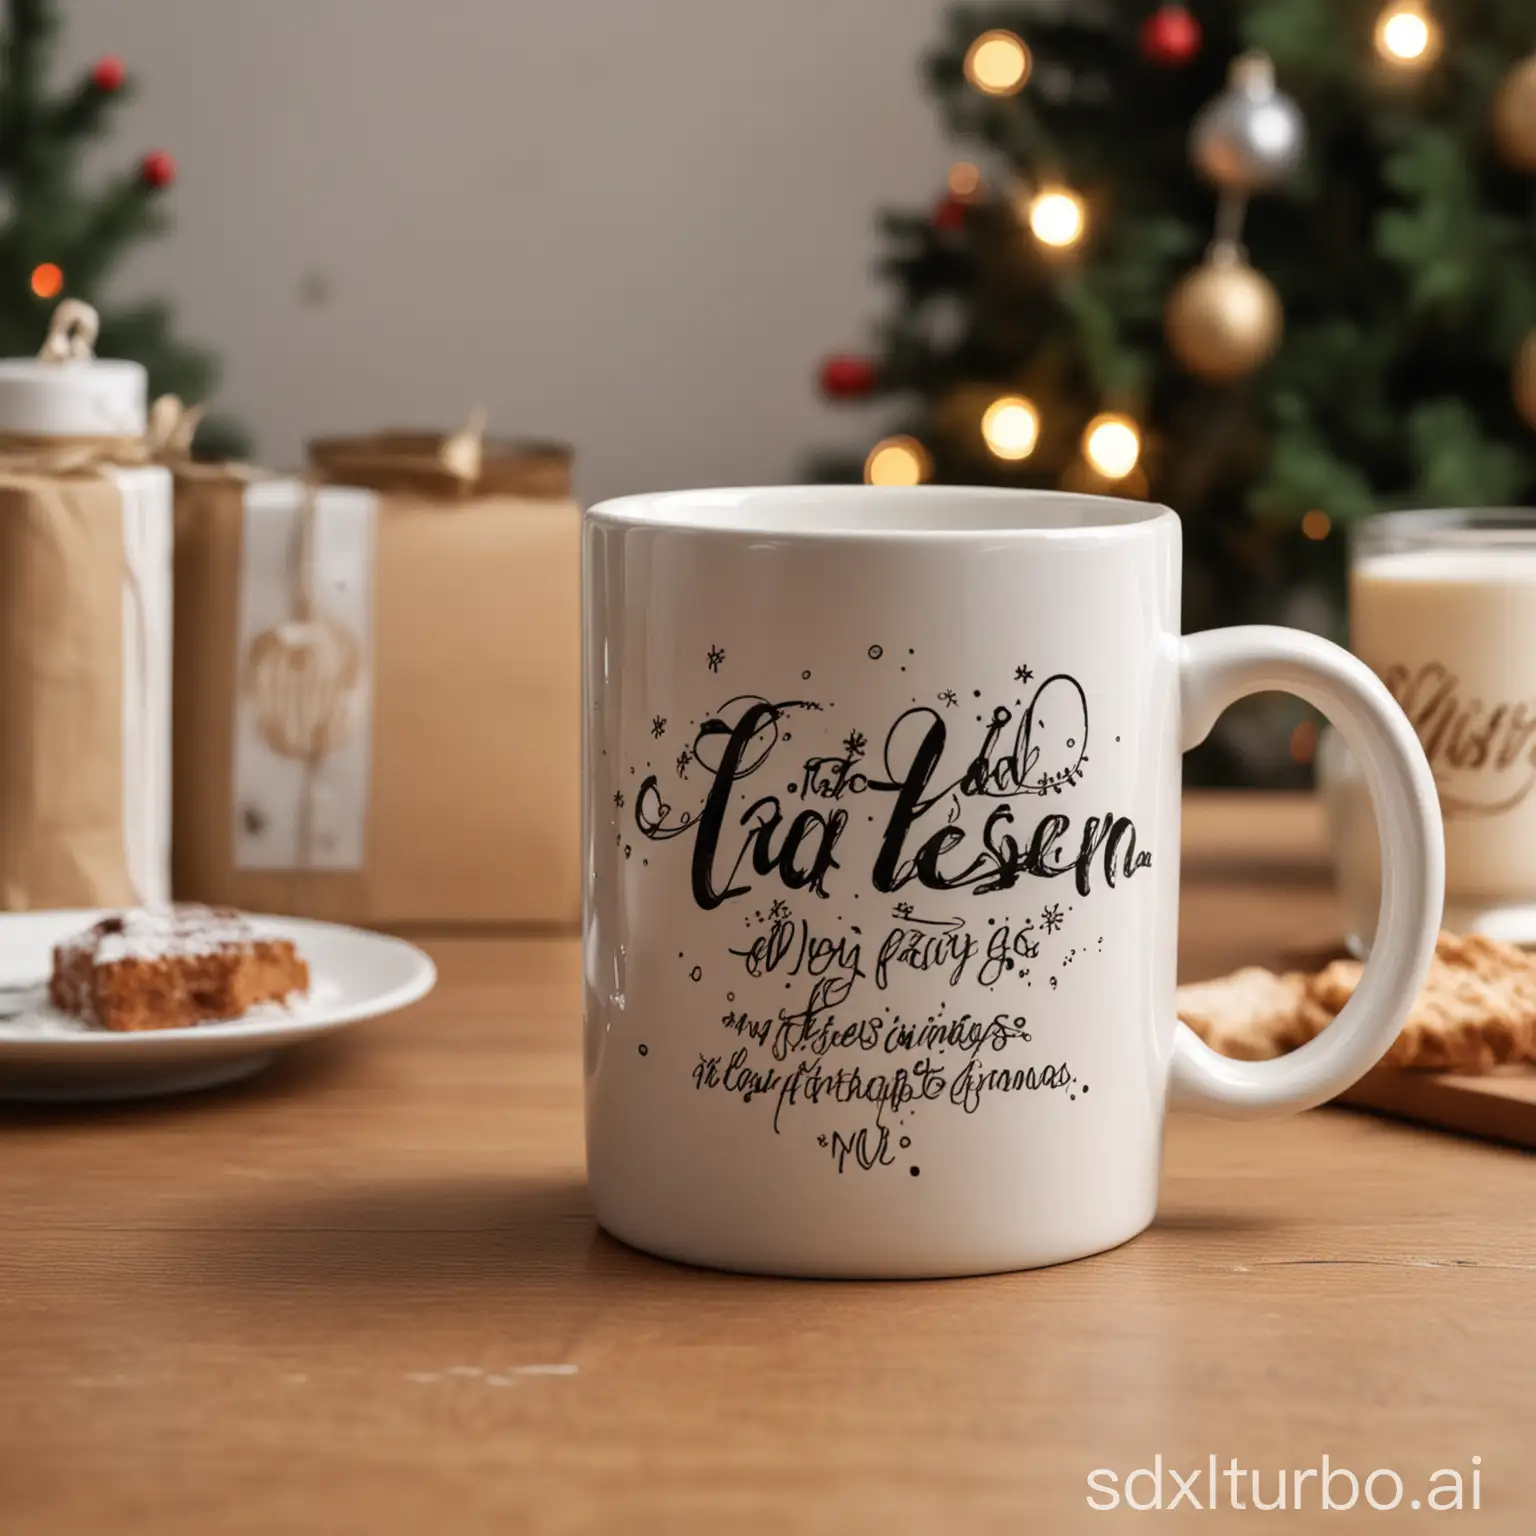 ceramic mug  printed with script text that reads "Add Your Design" exactly n initial caps at Christmas party with people drinking coffee in the background